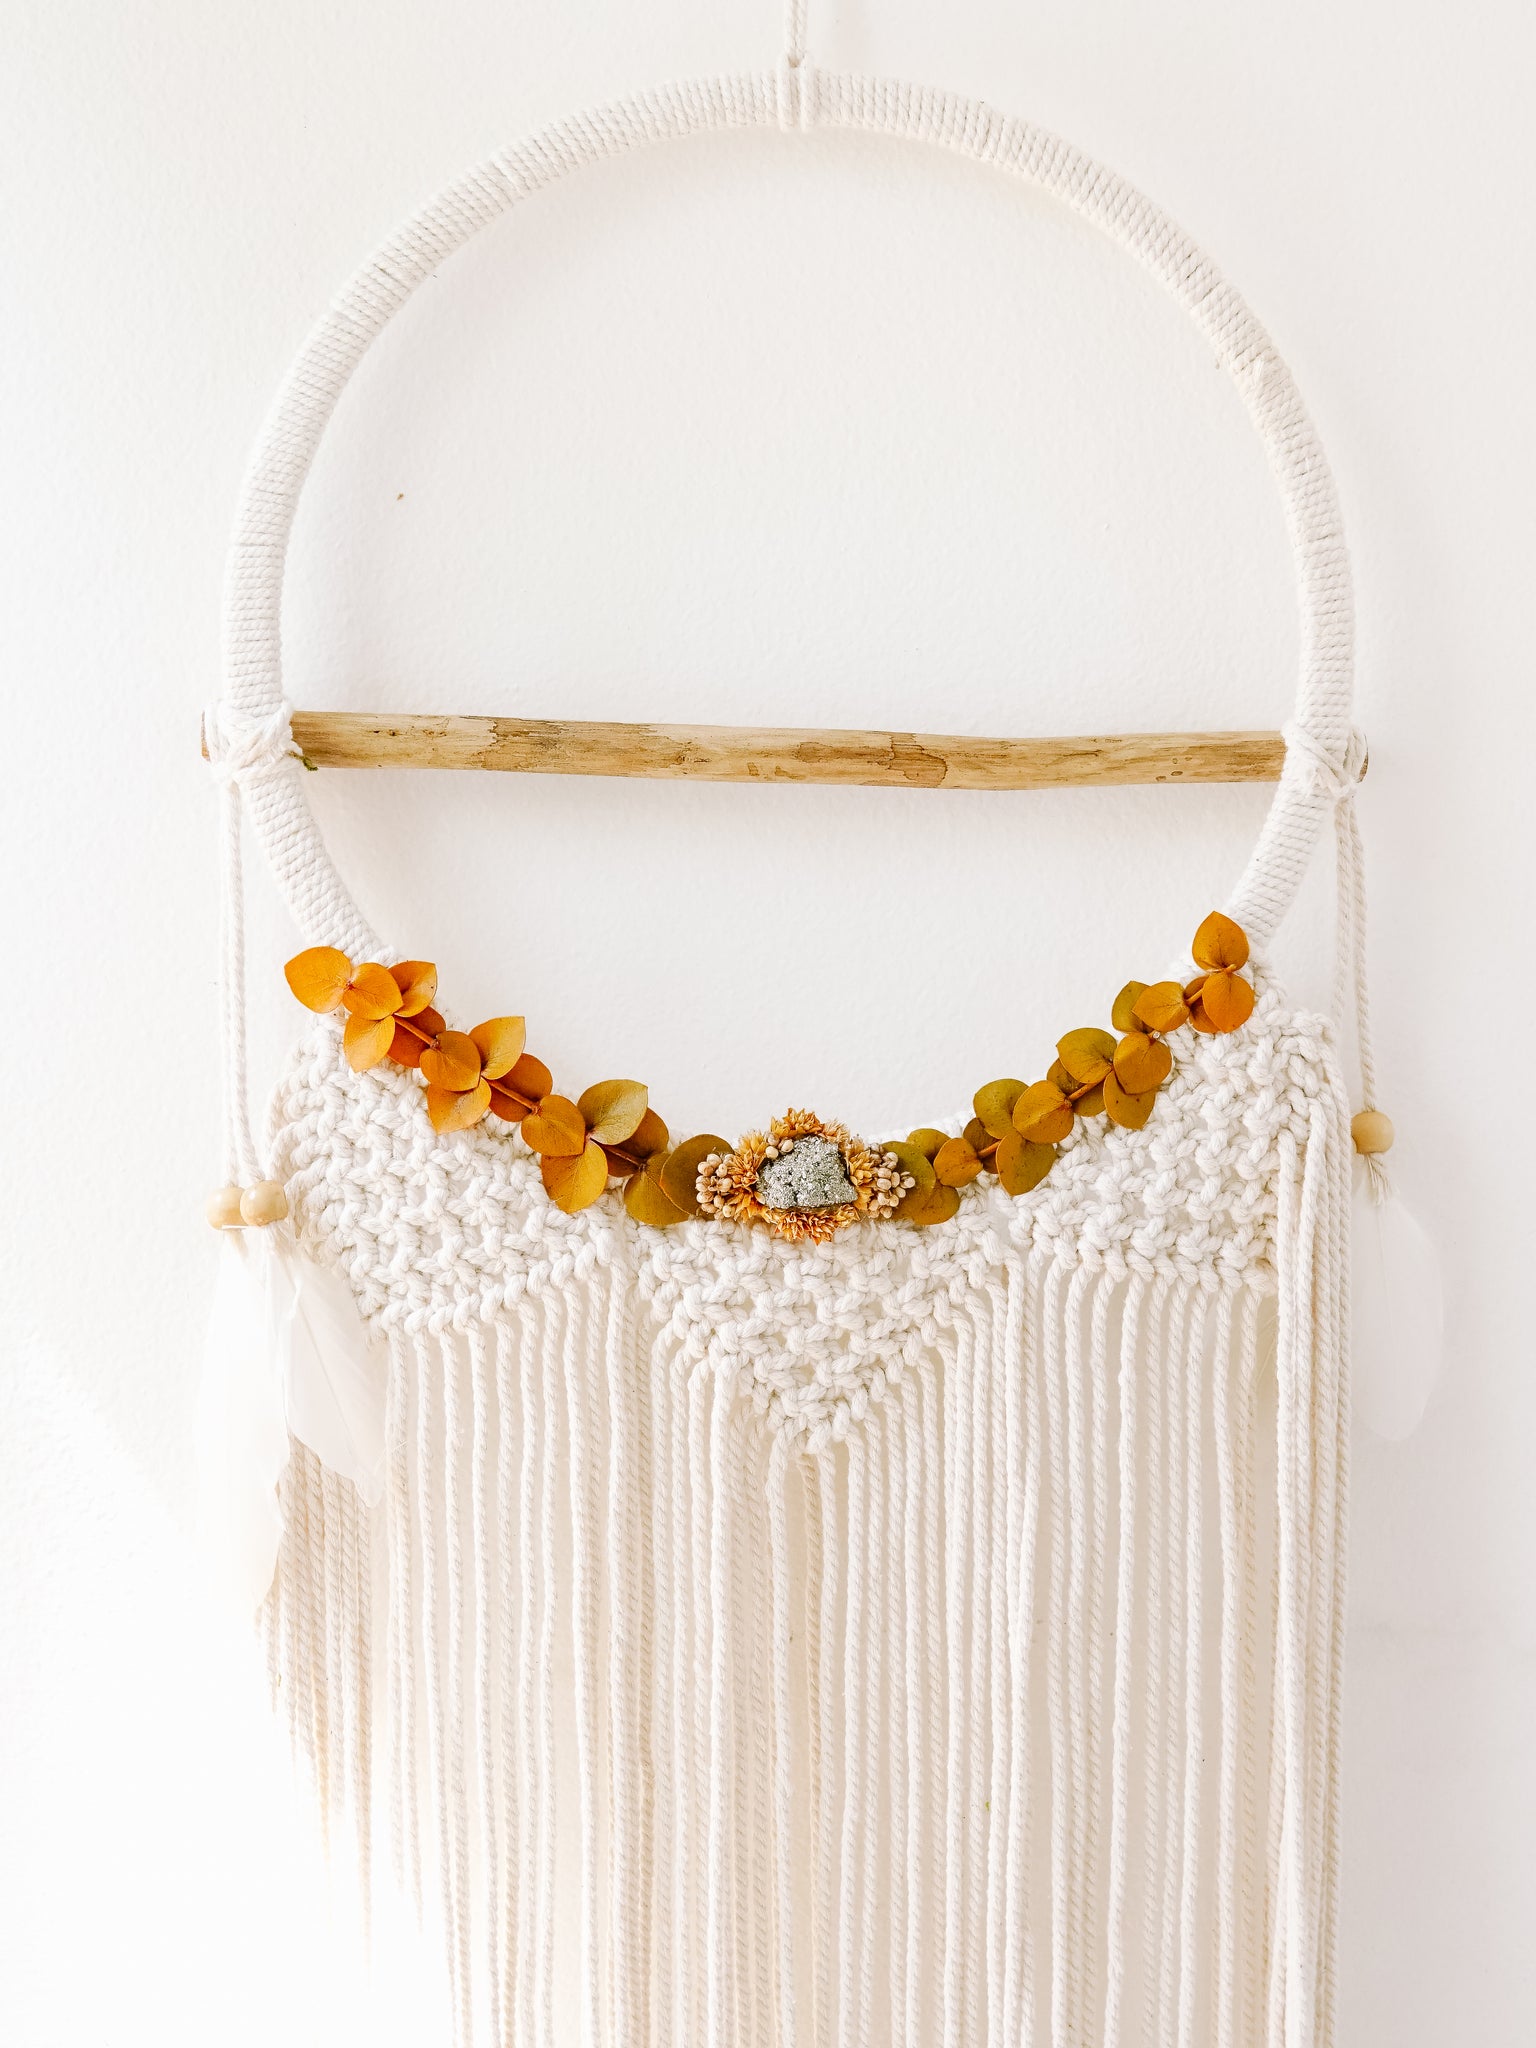 Macrame Wall Hang With Dried Florals & Pyrite